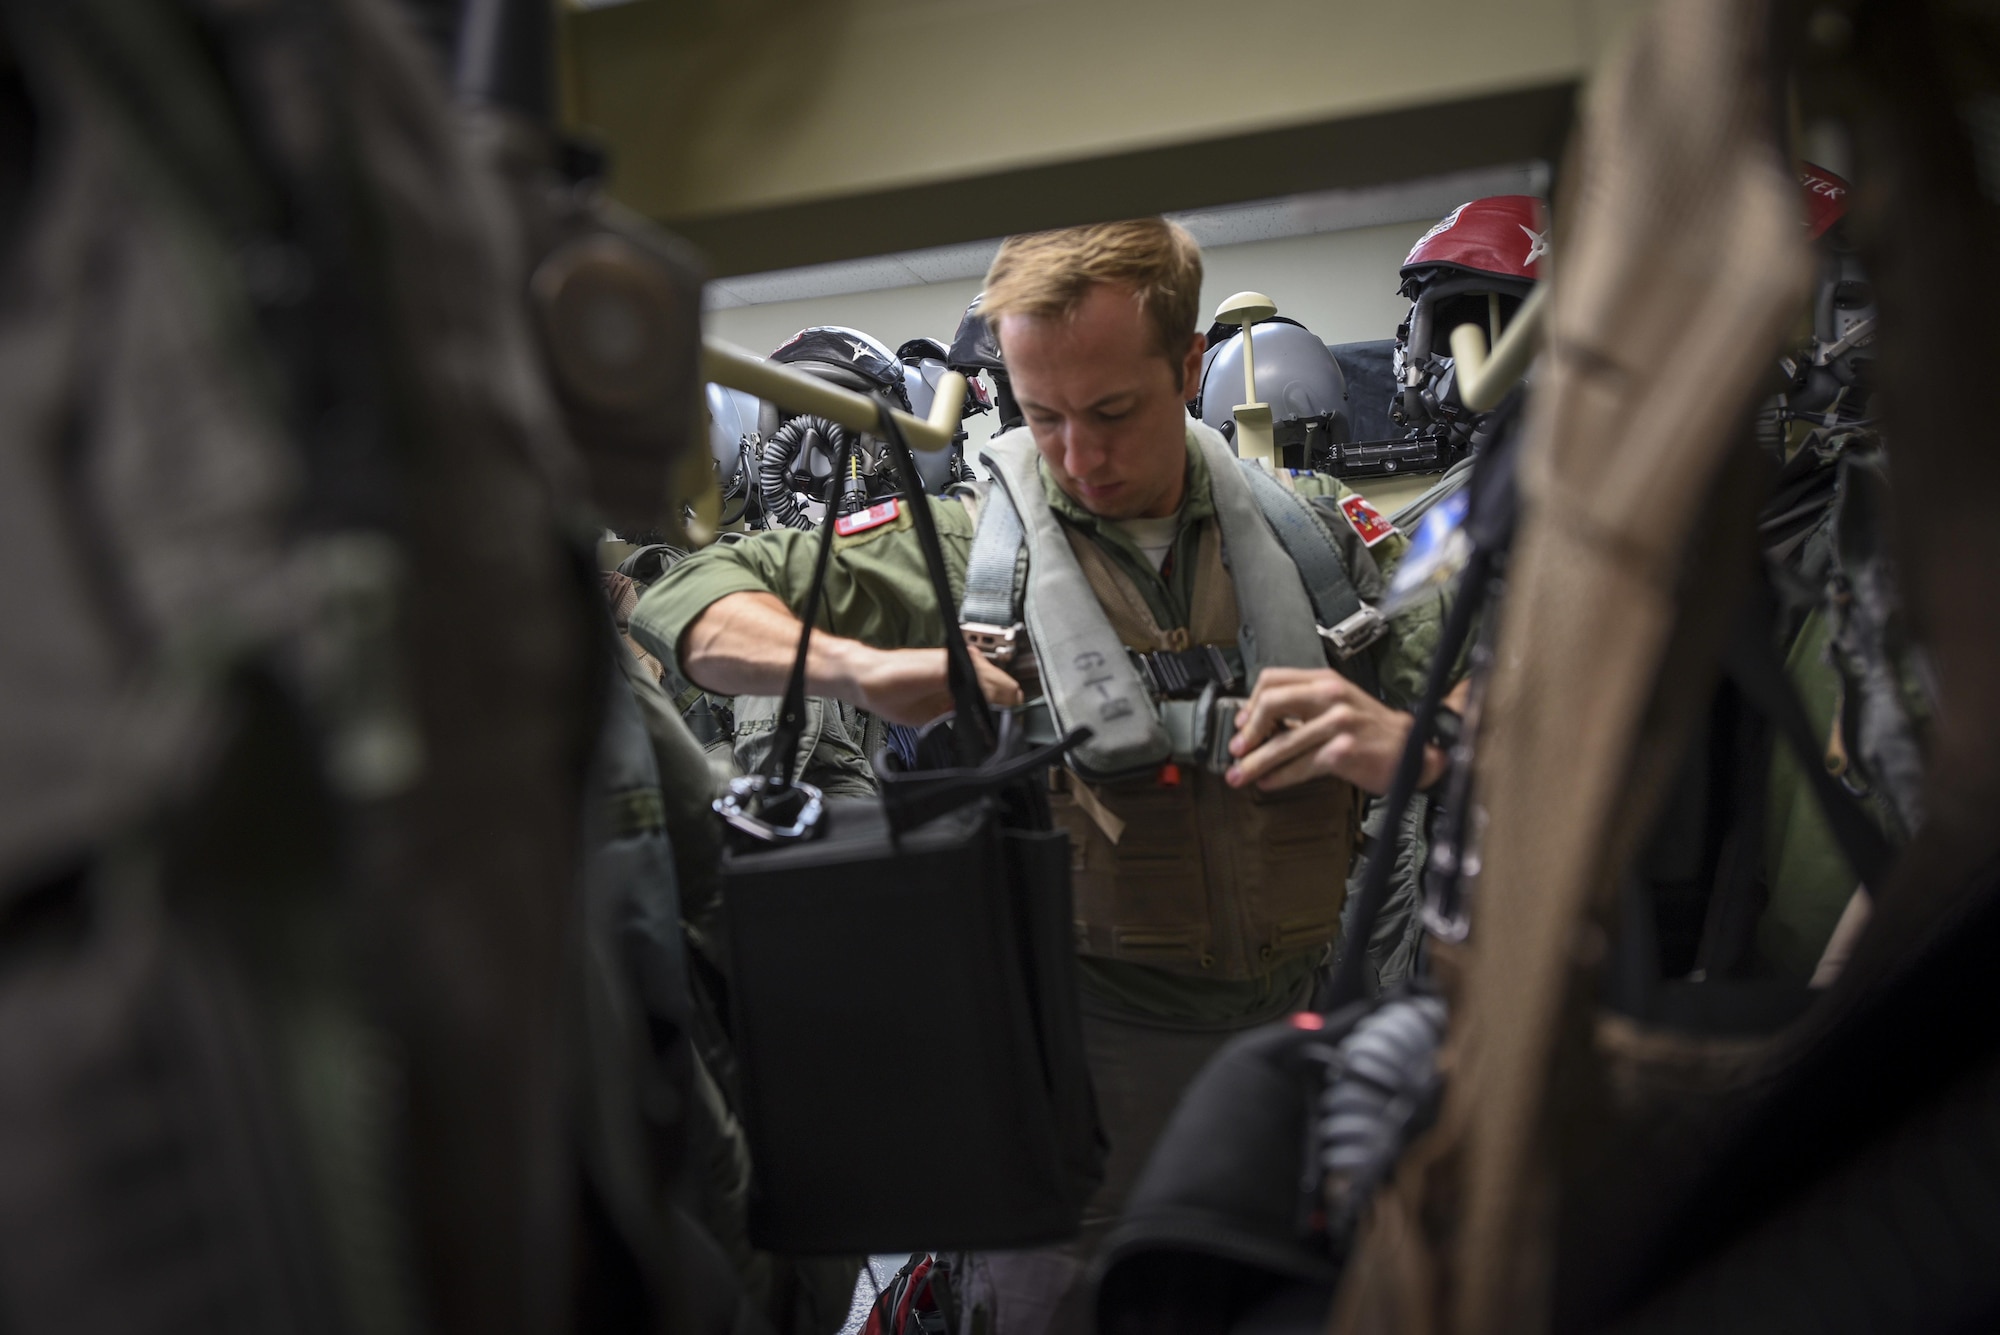 Capt. Chris Dubois, a 67th Fighter Squadron F-15 Eagle pilot, prepares for flight during exercise Cope North Feb. 20, 2017, at Andersen Air Force Base, Guam. The equipment is maintained and inspected by Airmen from the 18th Operations Support Squadron, who ensure life-saving gear will work properly in the event of an emergency. (U.S. Air Force photo/Senior Airman John Linzmeier)